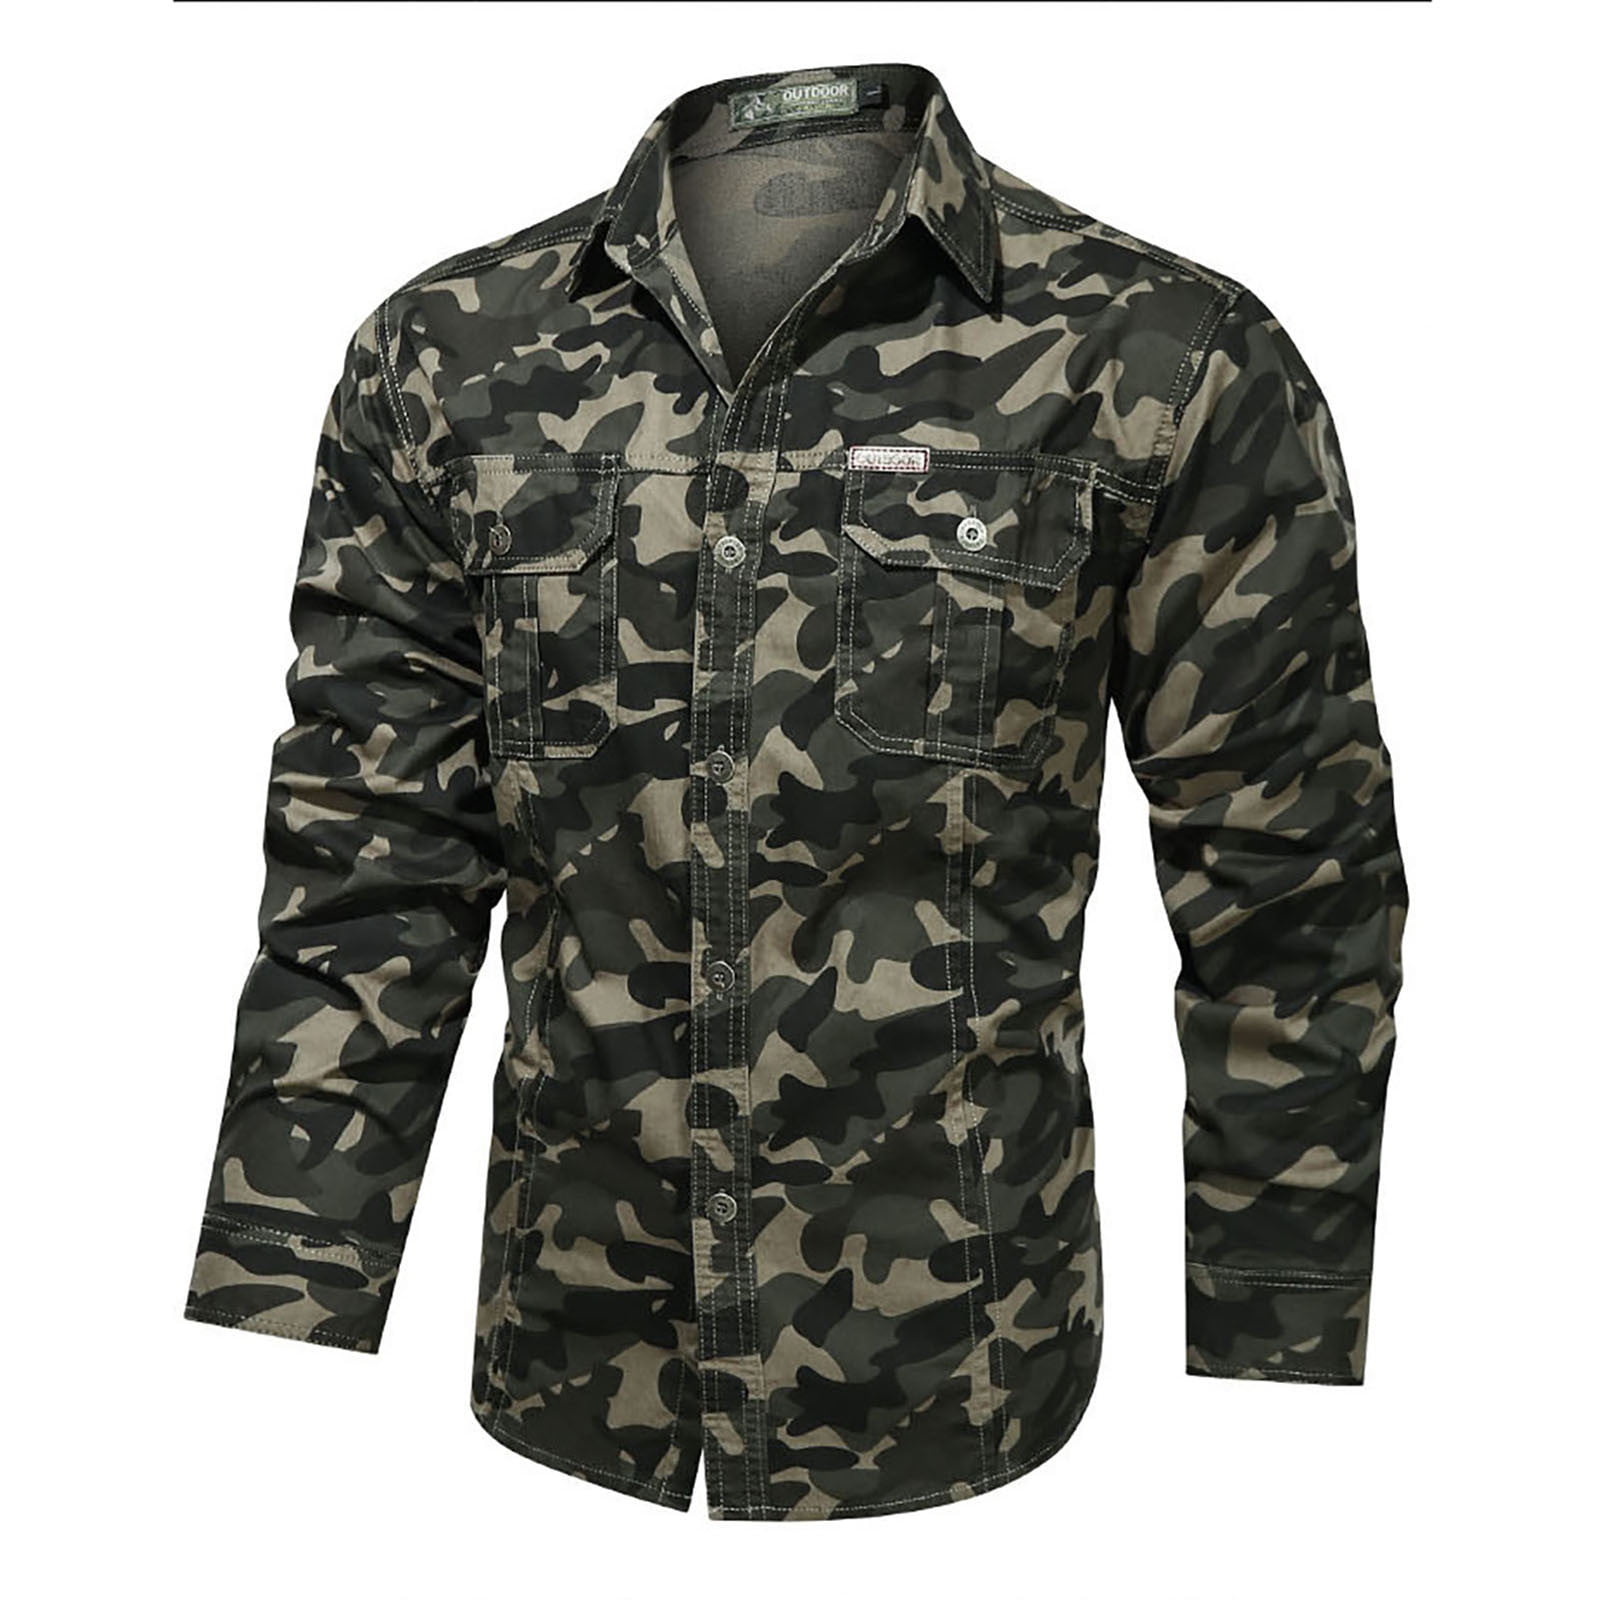 YYDGH Men's Camouflage Denim Shirt Camo Washed Military Long